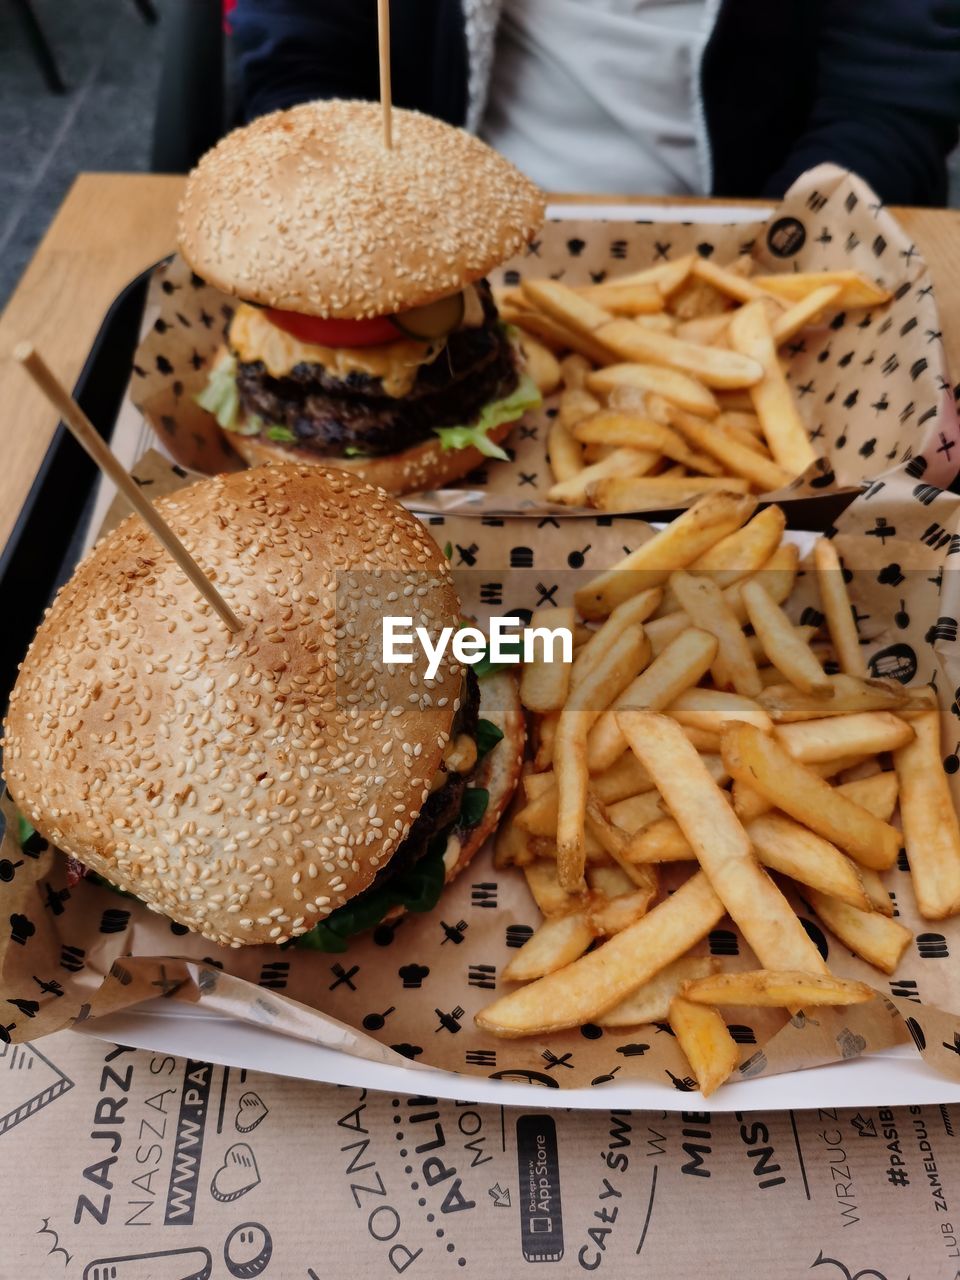 HIGH ANGLE VIEW OF BURGER AND FRIES ON TABLE